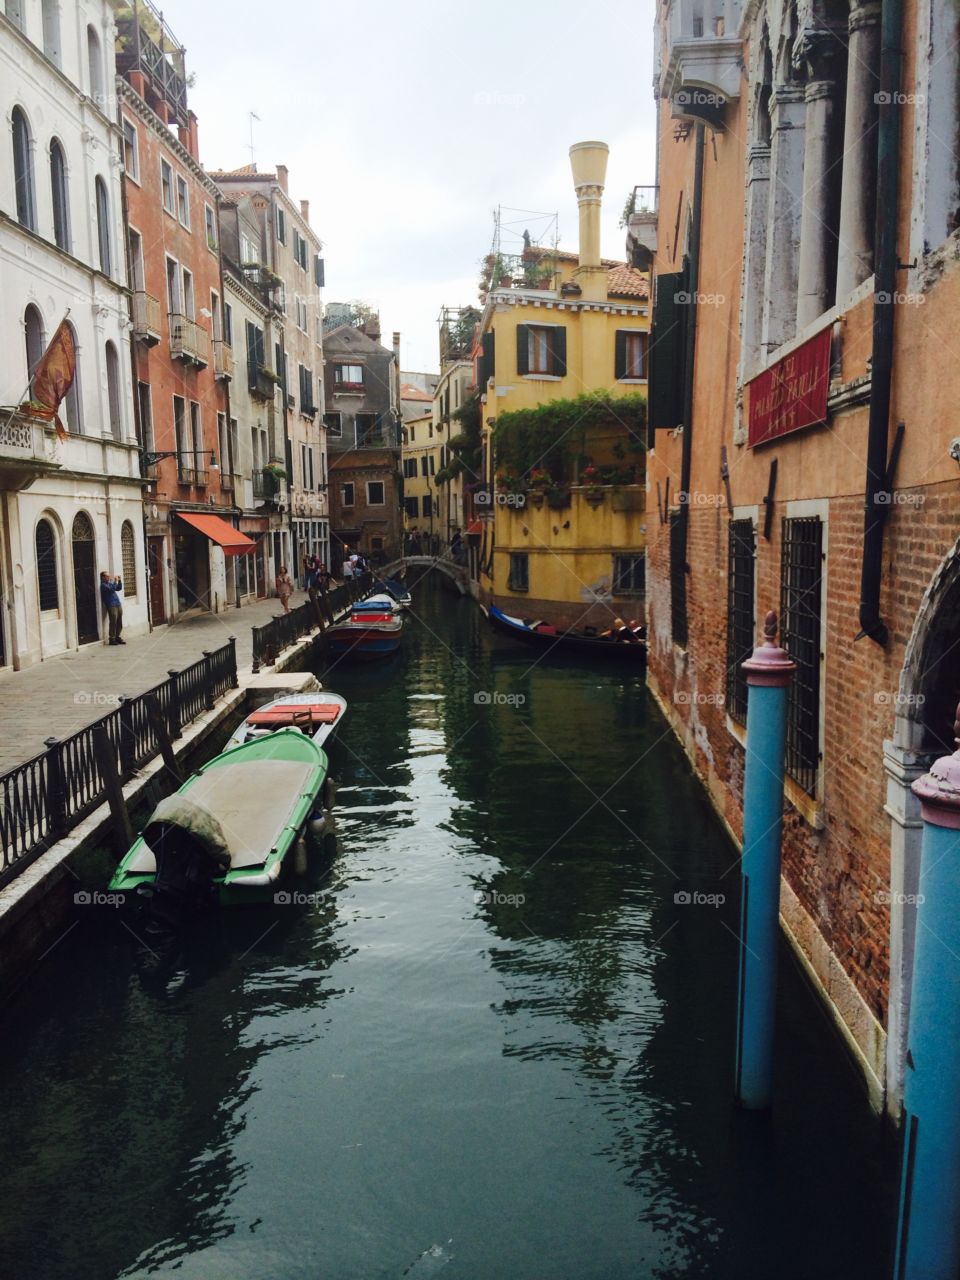 Venice and its canals! 